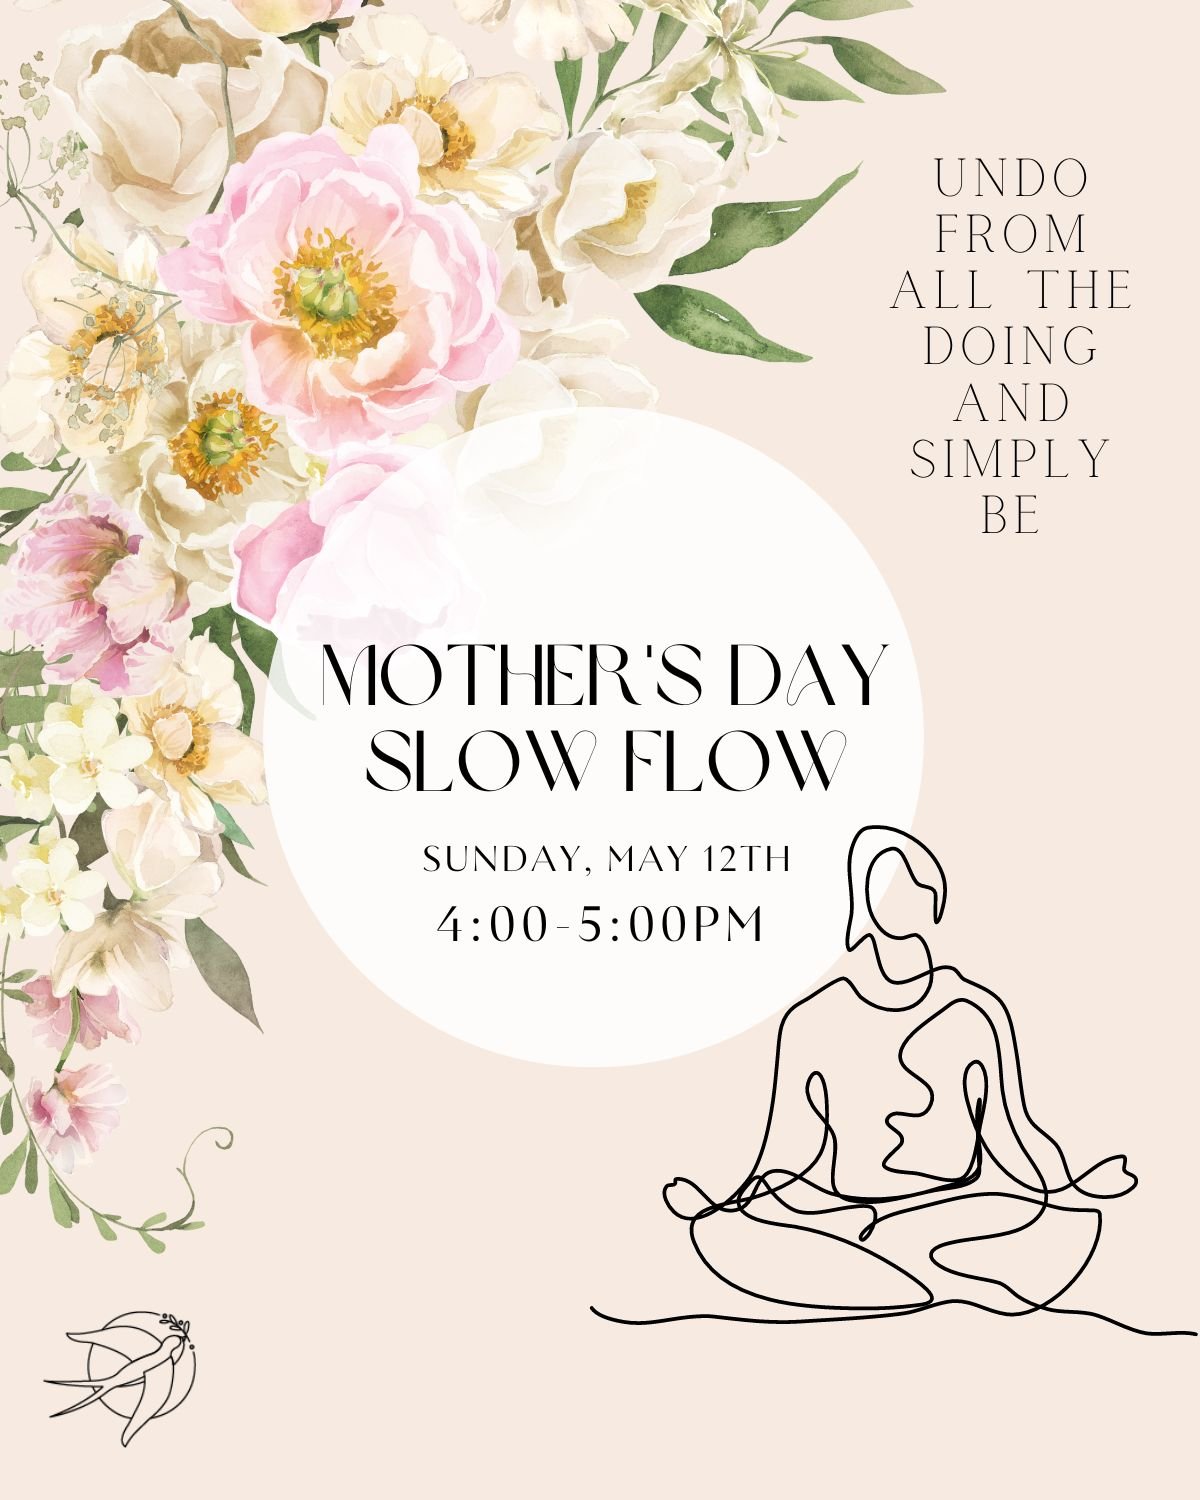 🪷 Take Extra Care of Yourself 🪷

Undo from all the doing and simply be. Allow some self care this Mother's Day with a Slow Flow.

MOTHER'S DAY SLOW FLOW
Sunday, May 12th at 4:00 pm
guided by Abigail 

Slow flow: Yoga postures practiced slowly with 